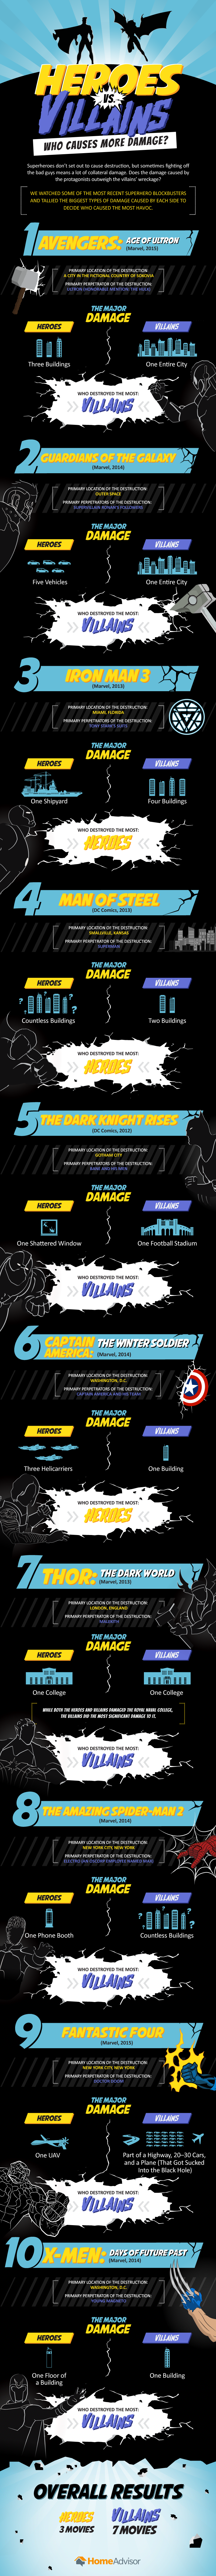 Who Causes More Destruction In Superhero Movies? Heroes Or Villains?